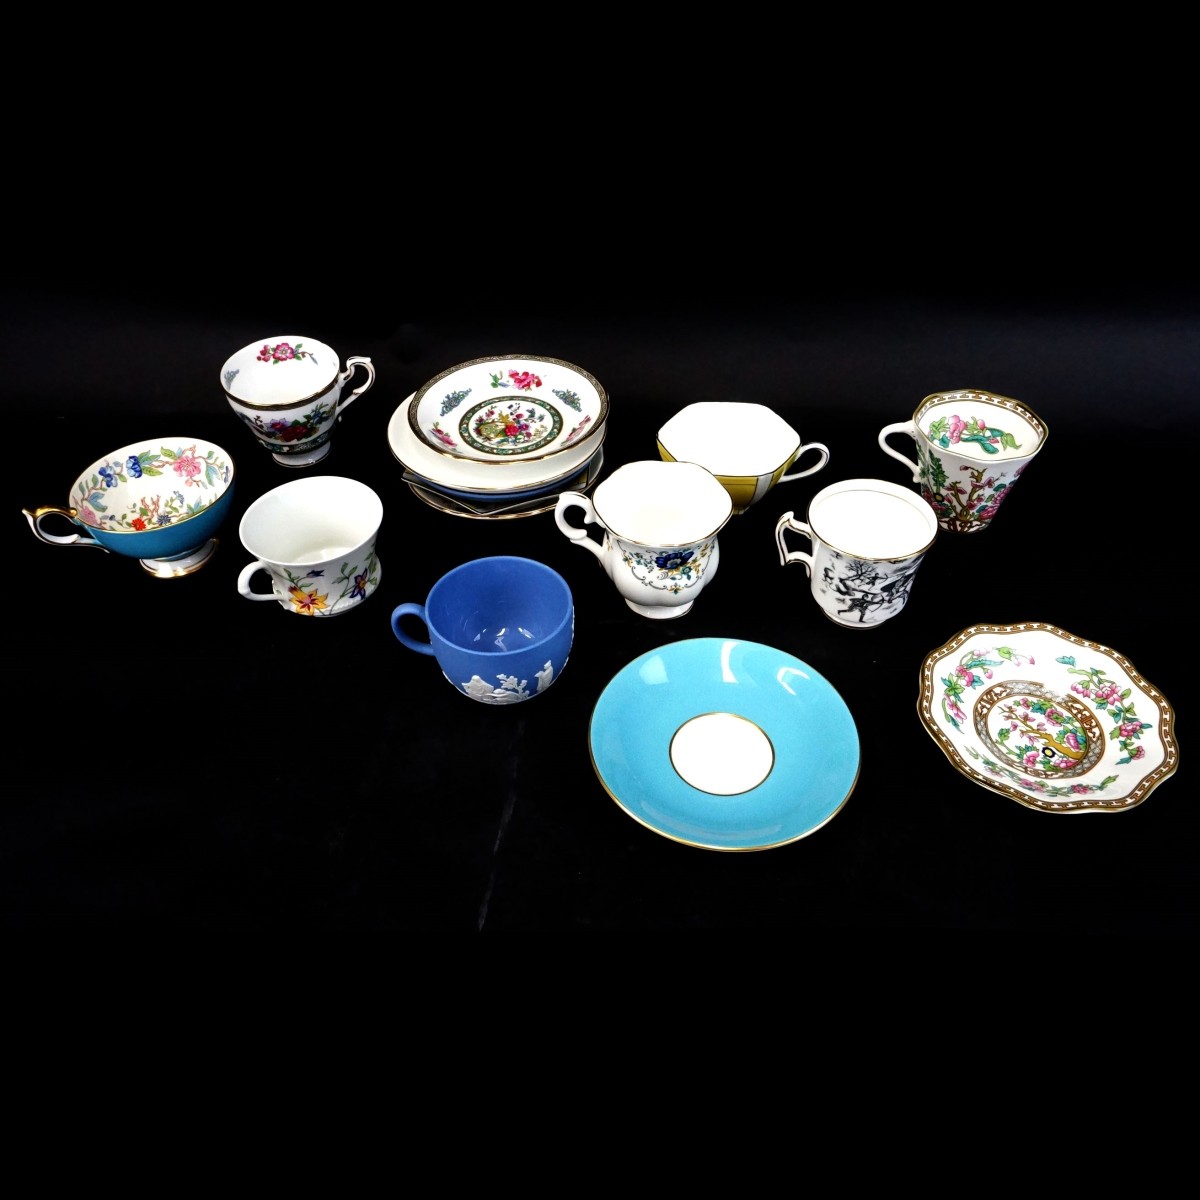 Grouping of Eight Porcelain Cups and Saucers